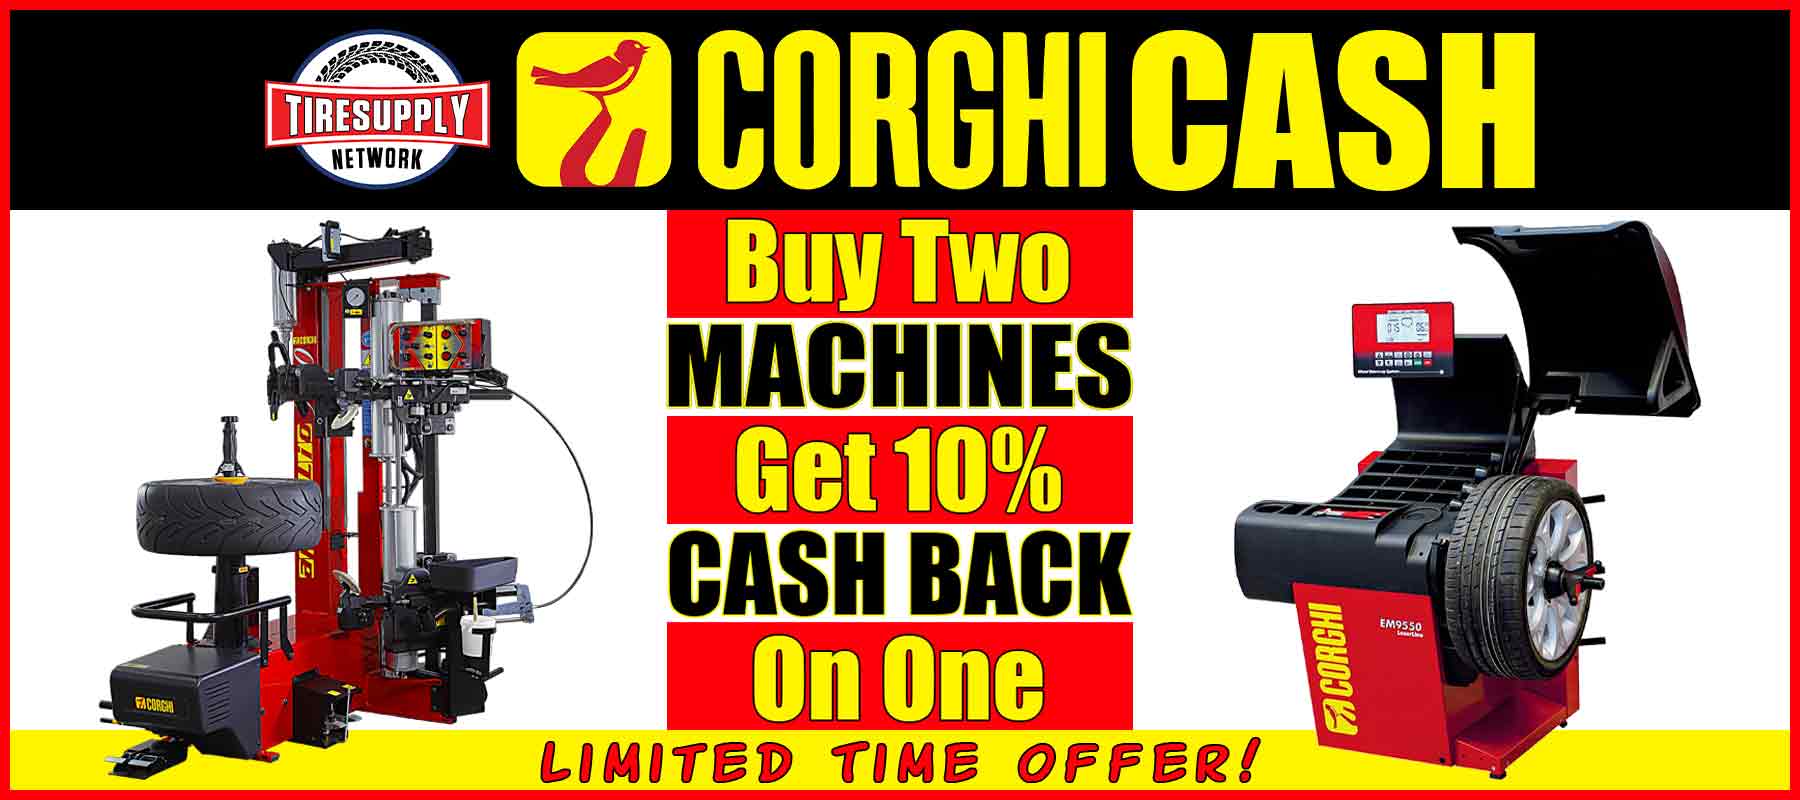 Buy Any 2 Corghi Machines and Get 10% Cash Back on the Higher Priced Unit!